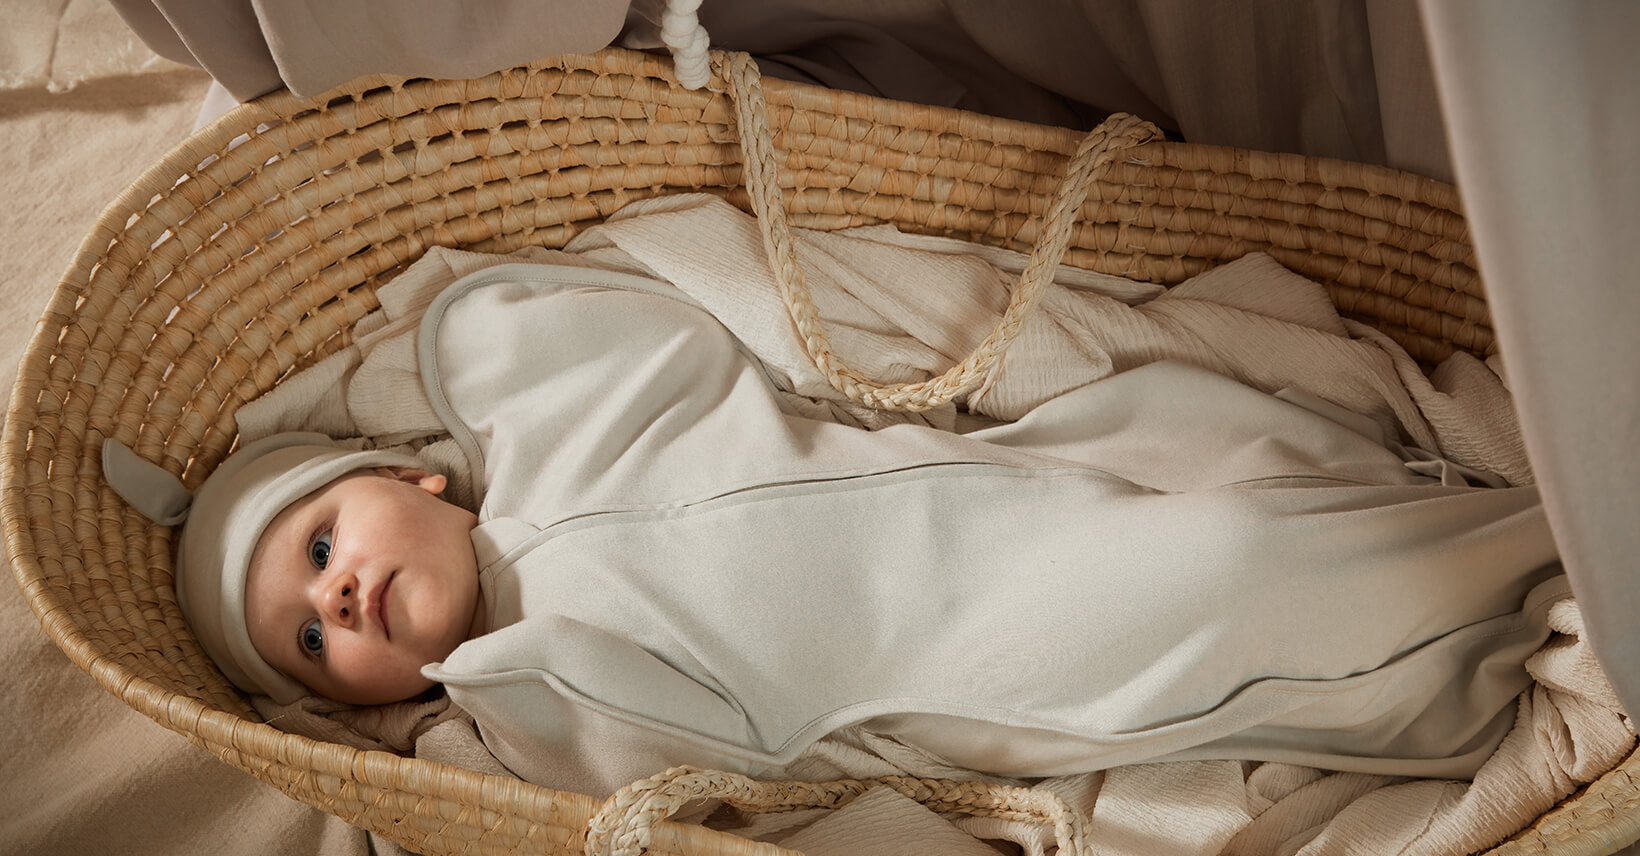 Are Sleep Sacks Really Safe For Your Baby to Sleep In?